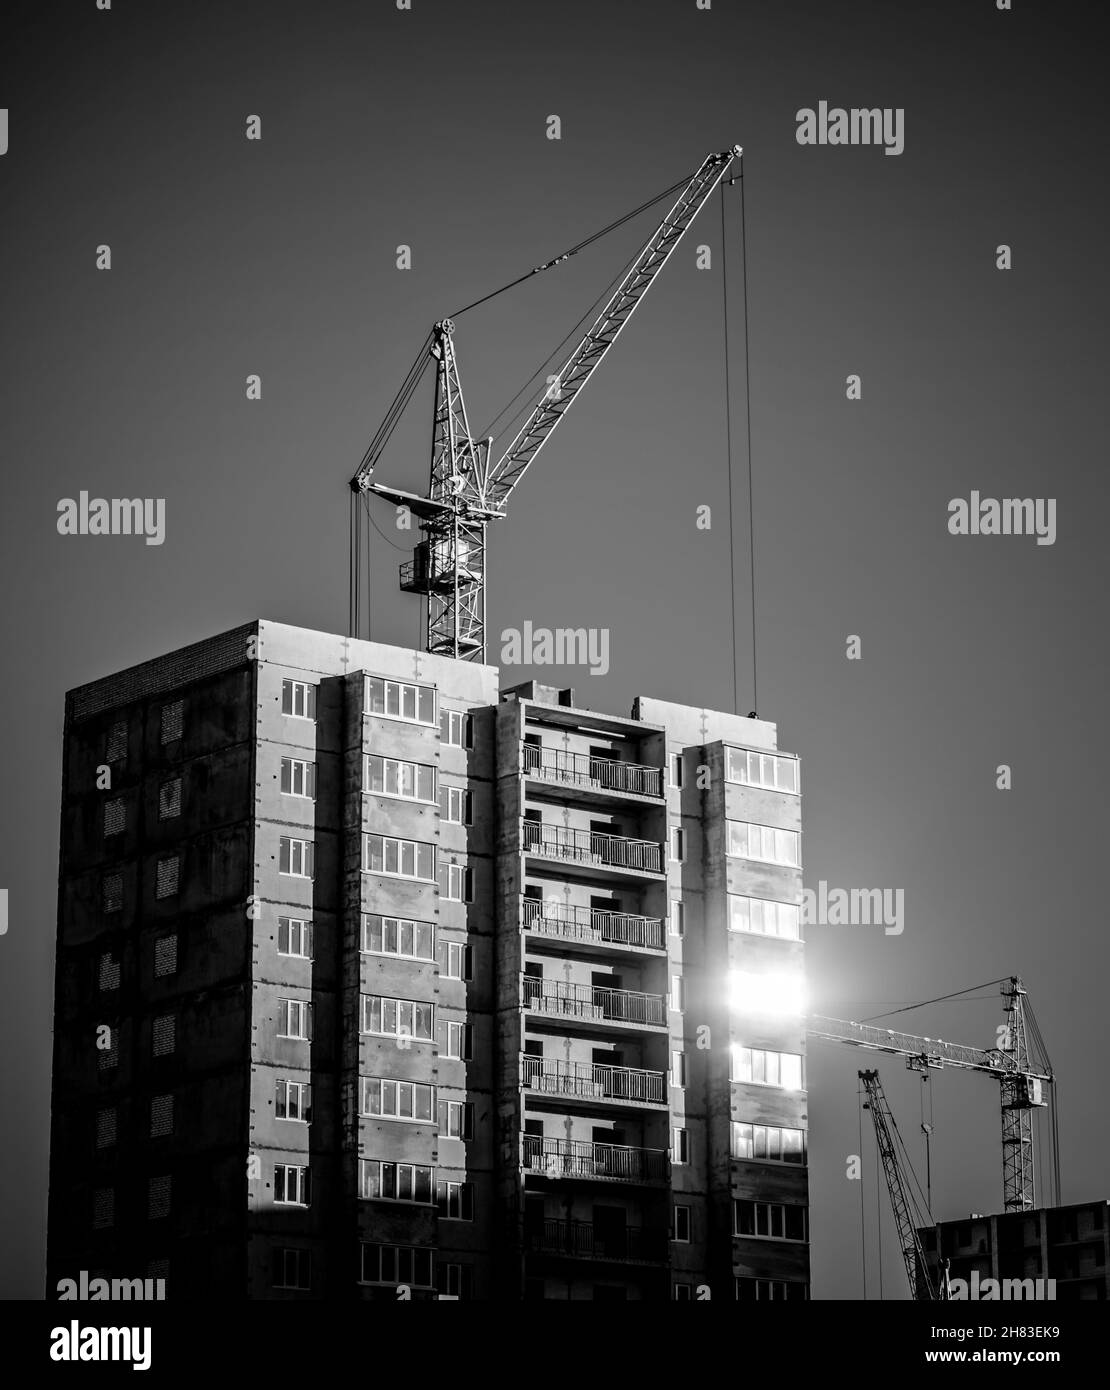 silhouettes of industrial construction cranes and building Stock Photo